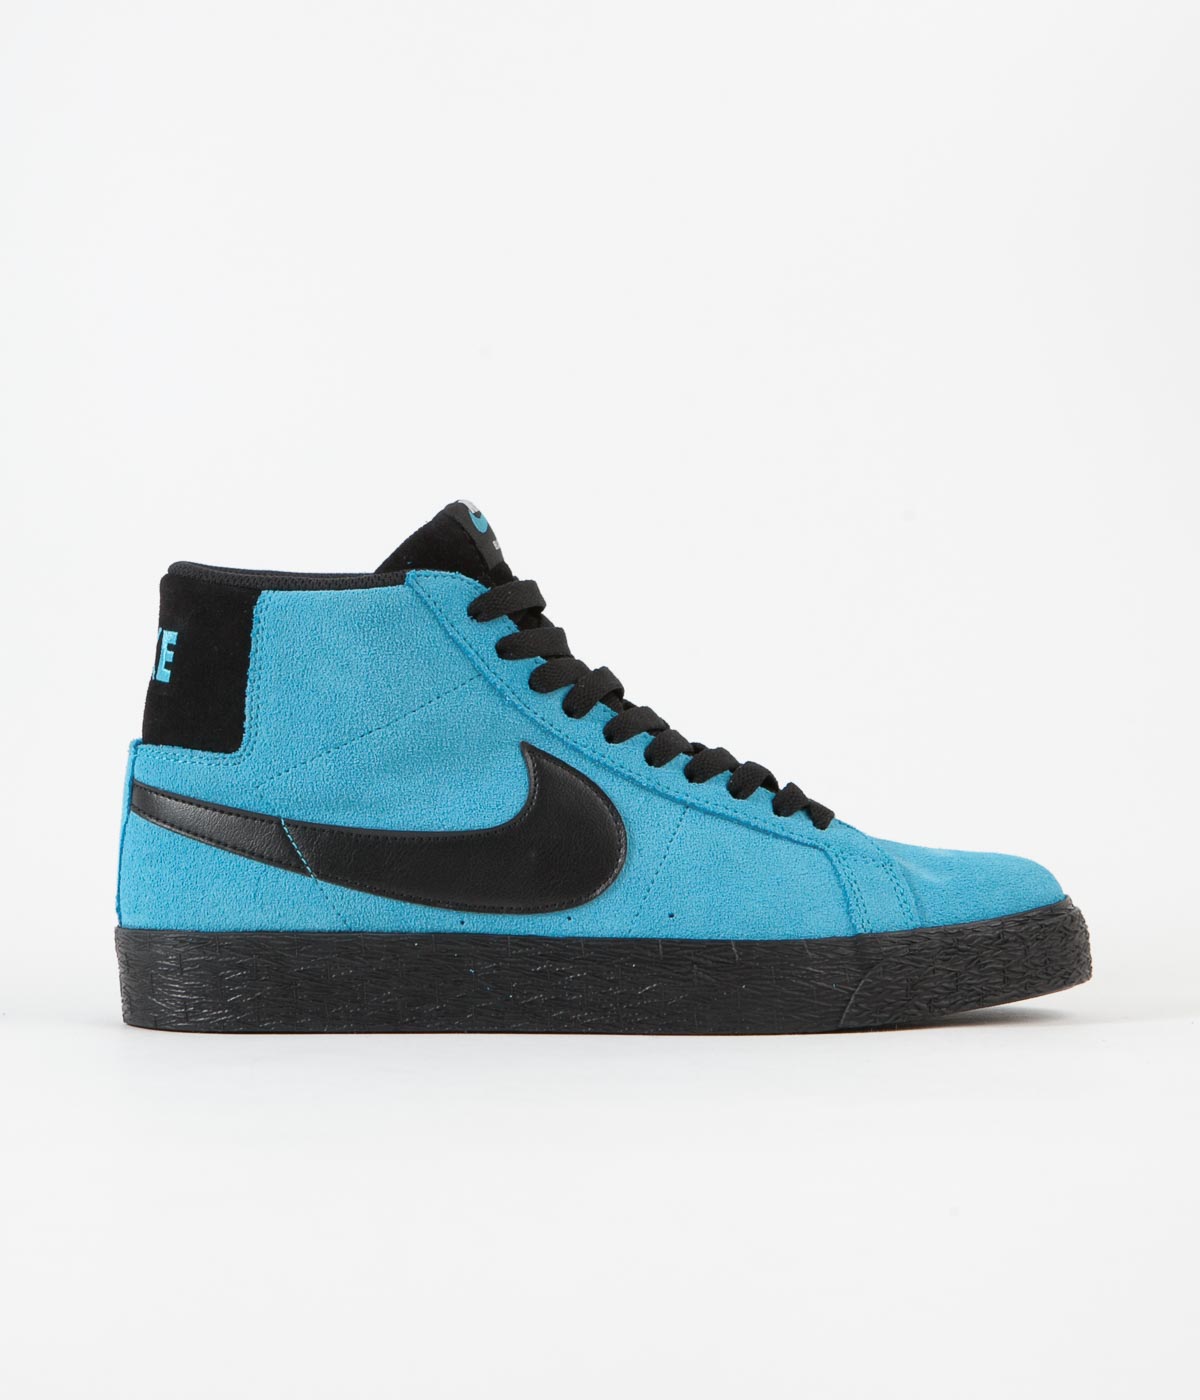 nike blue black and white shoes